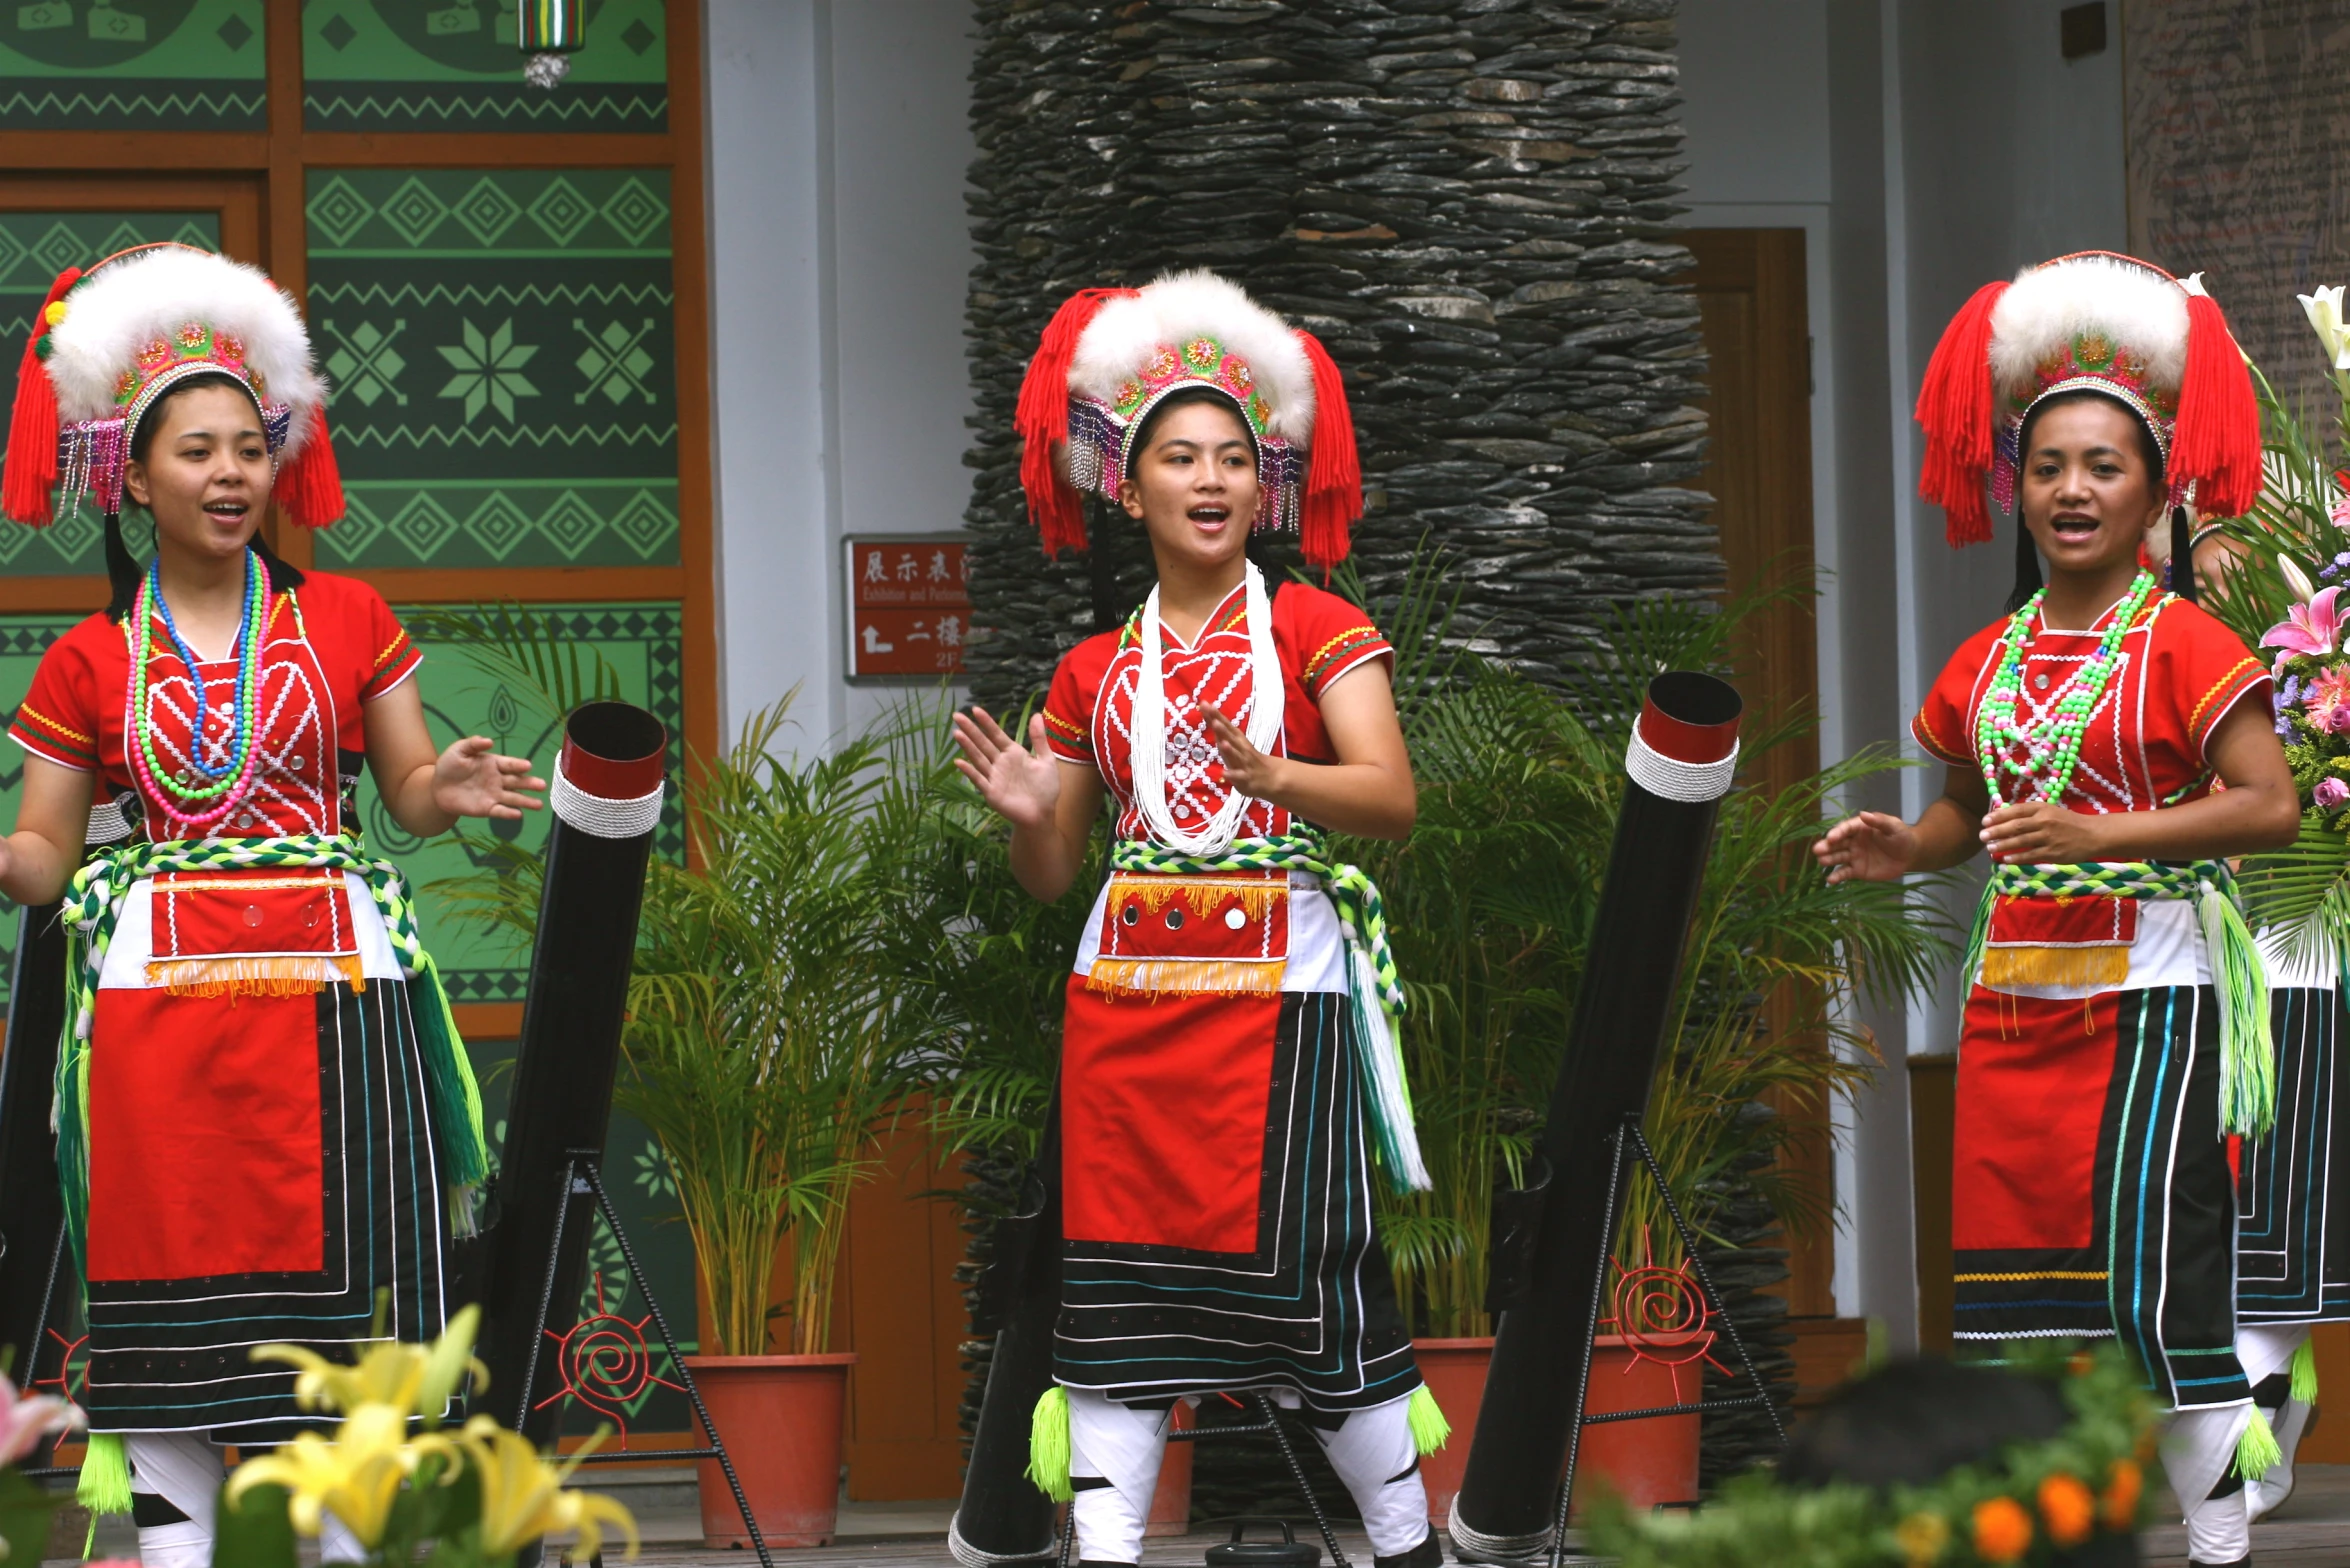 three women in elaborate clothing performing a dance